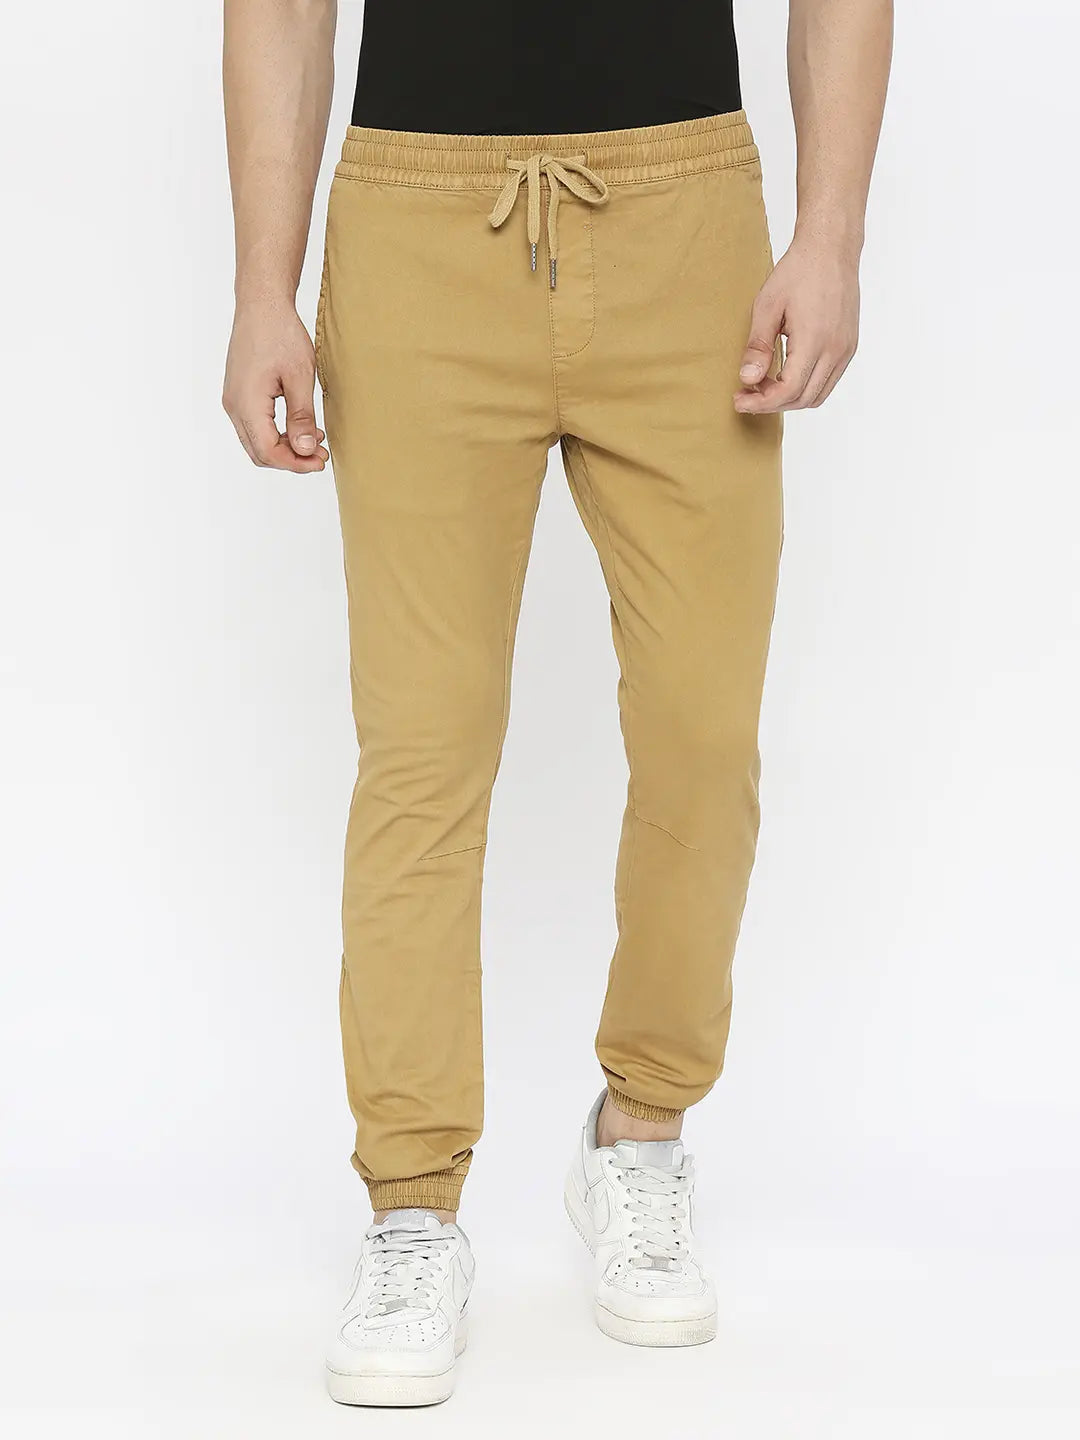 Buy Farah Men Navy 4Way Stretch Trousers Online  788674  The Collective